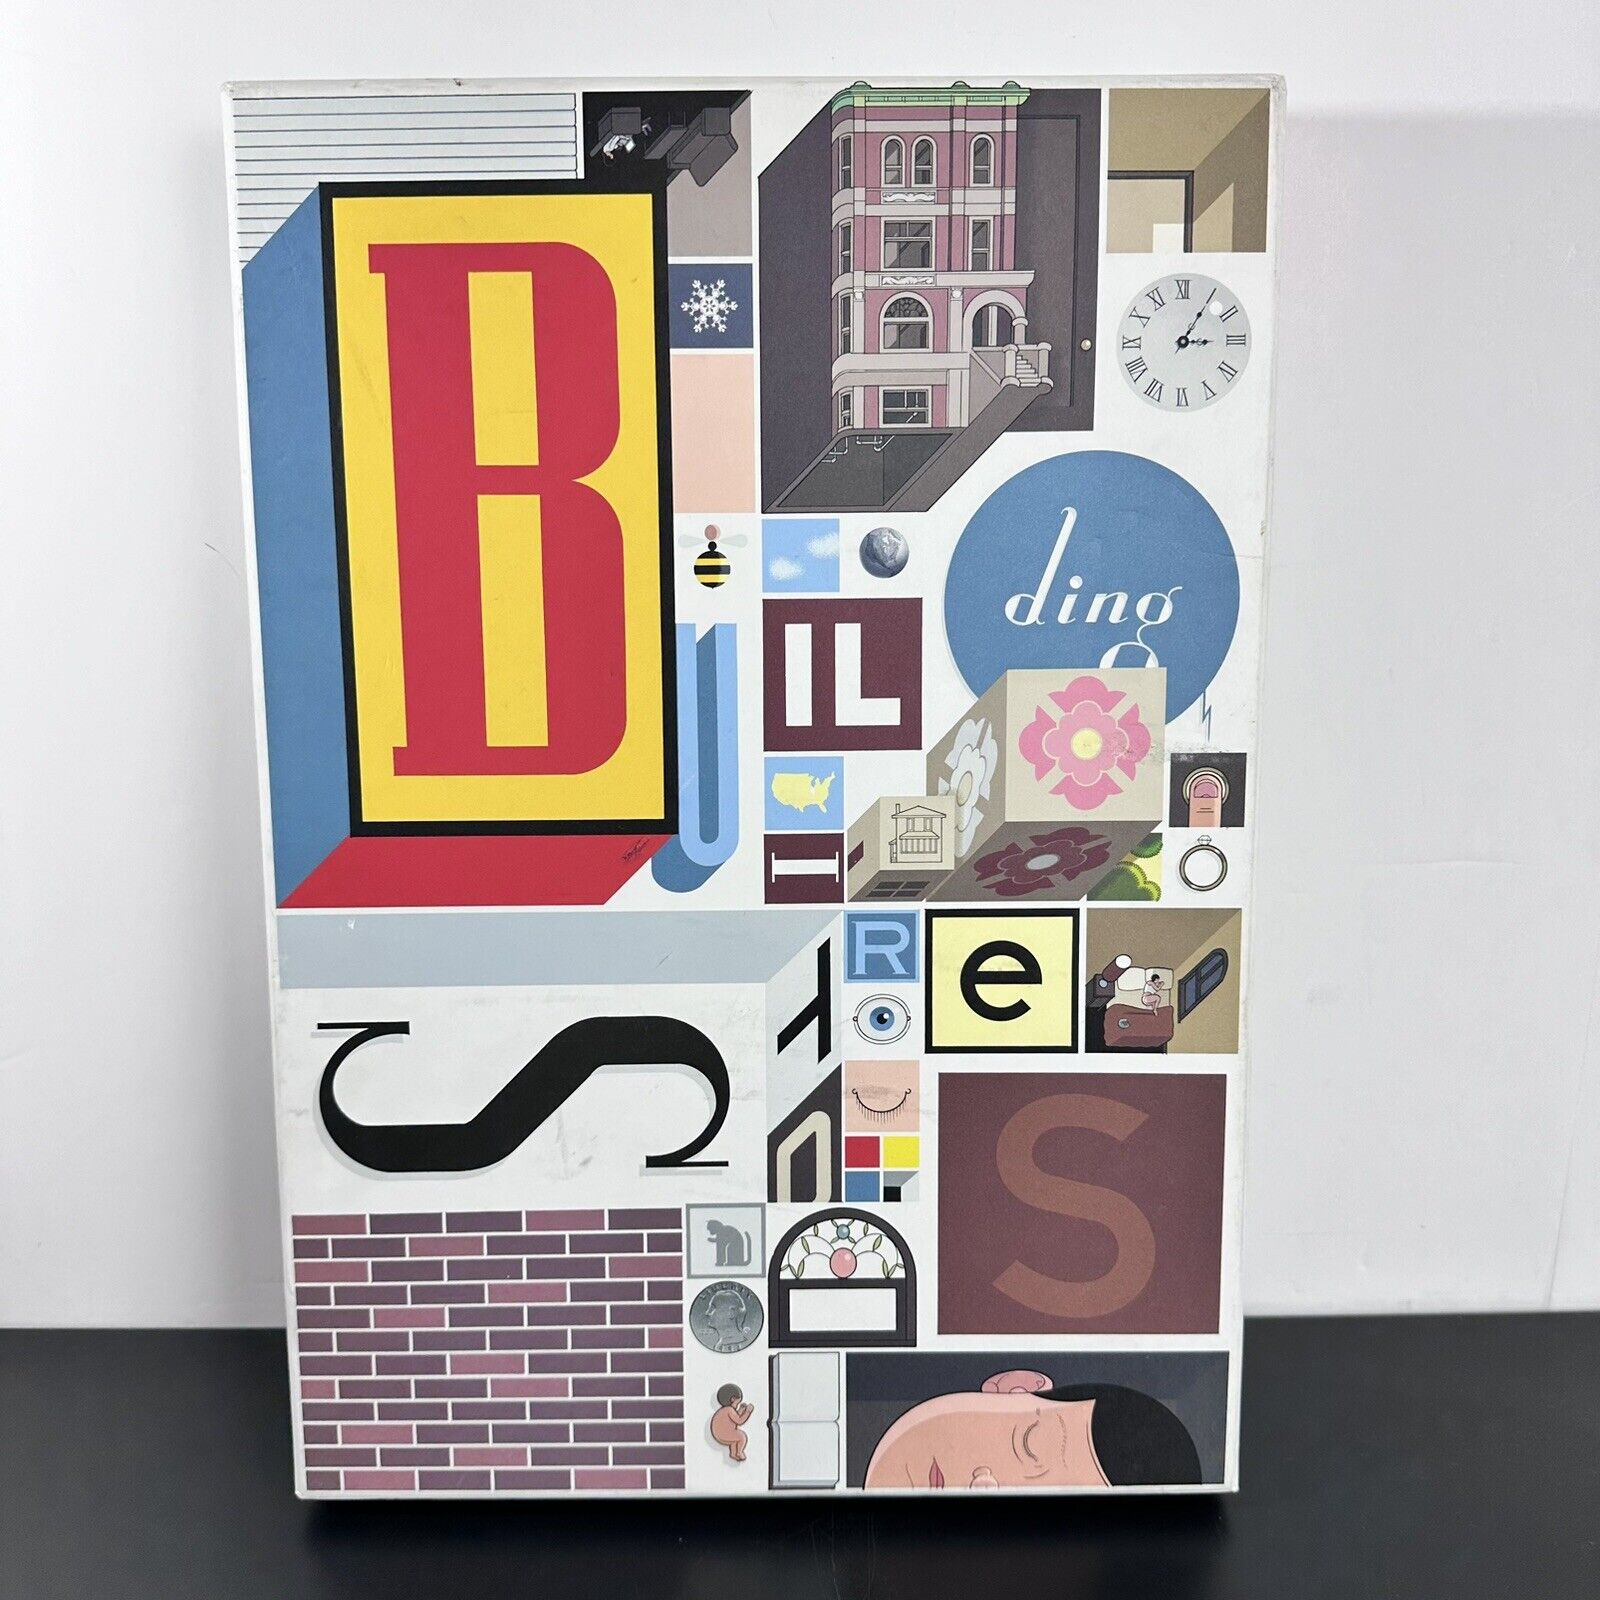 Building Stories By Chris Ware - Graphic Novel Set In A Box - Pantheon 2012